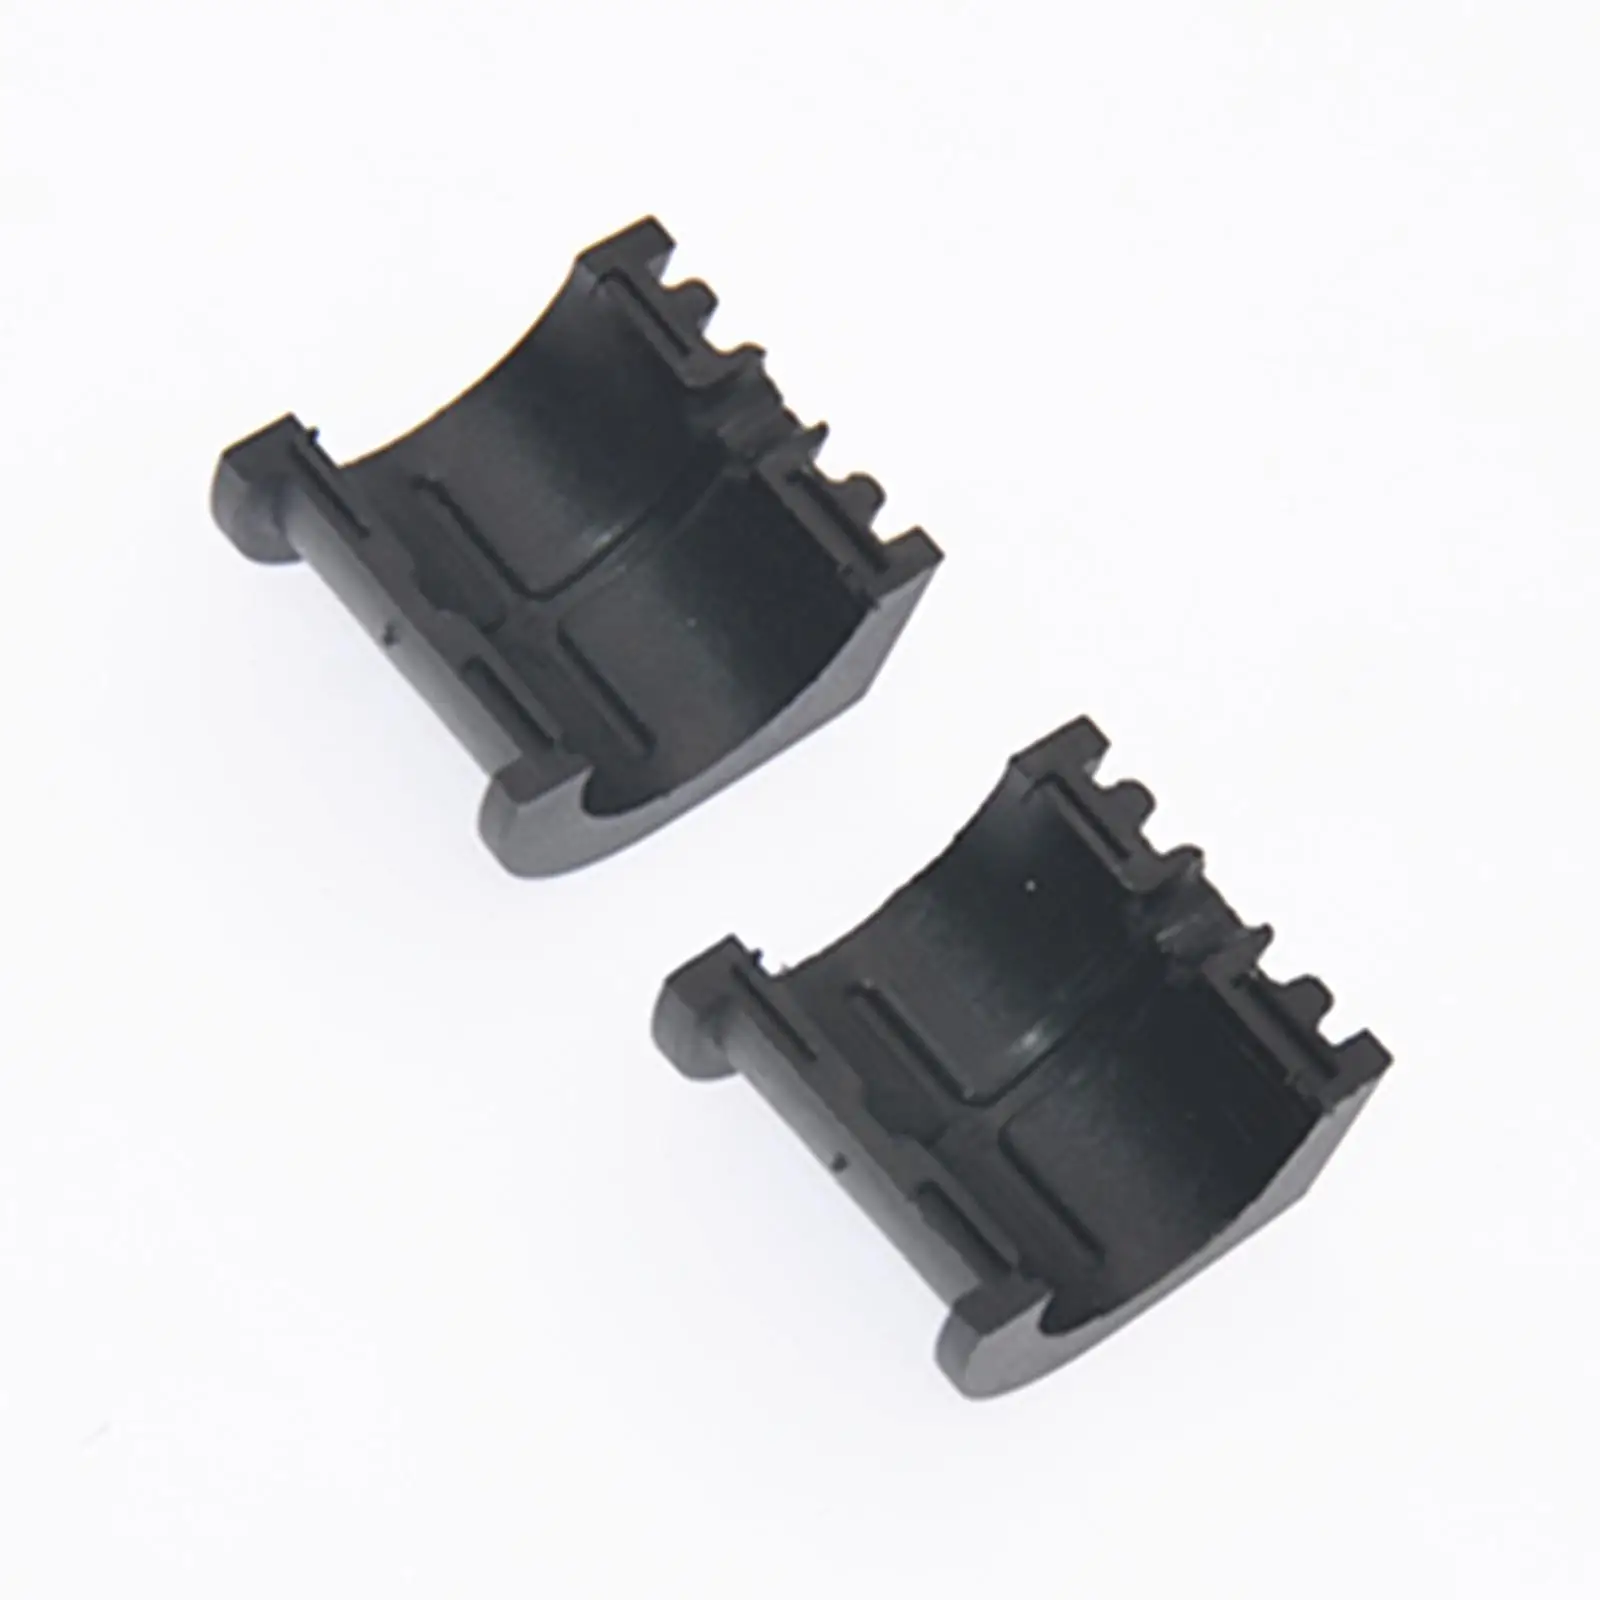 2 Pieces Vehicle Upper Steering Bushing 5439731 5438903 for Polaris Sportsman 300 600 700 Replace Spare Parts